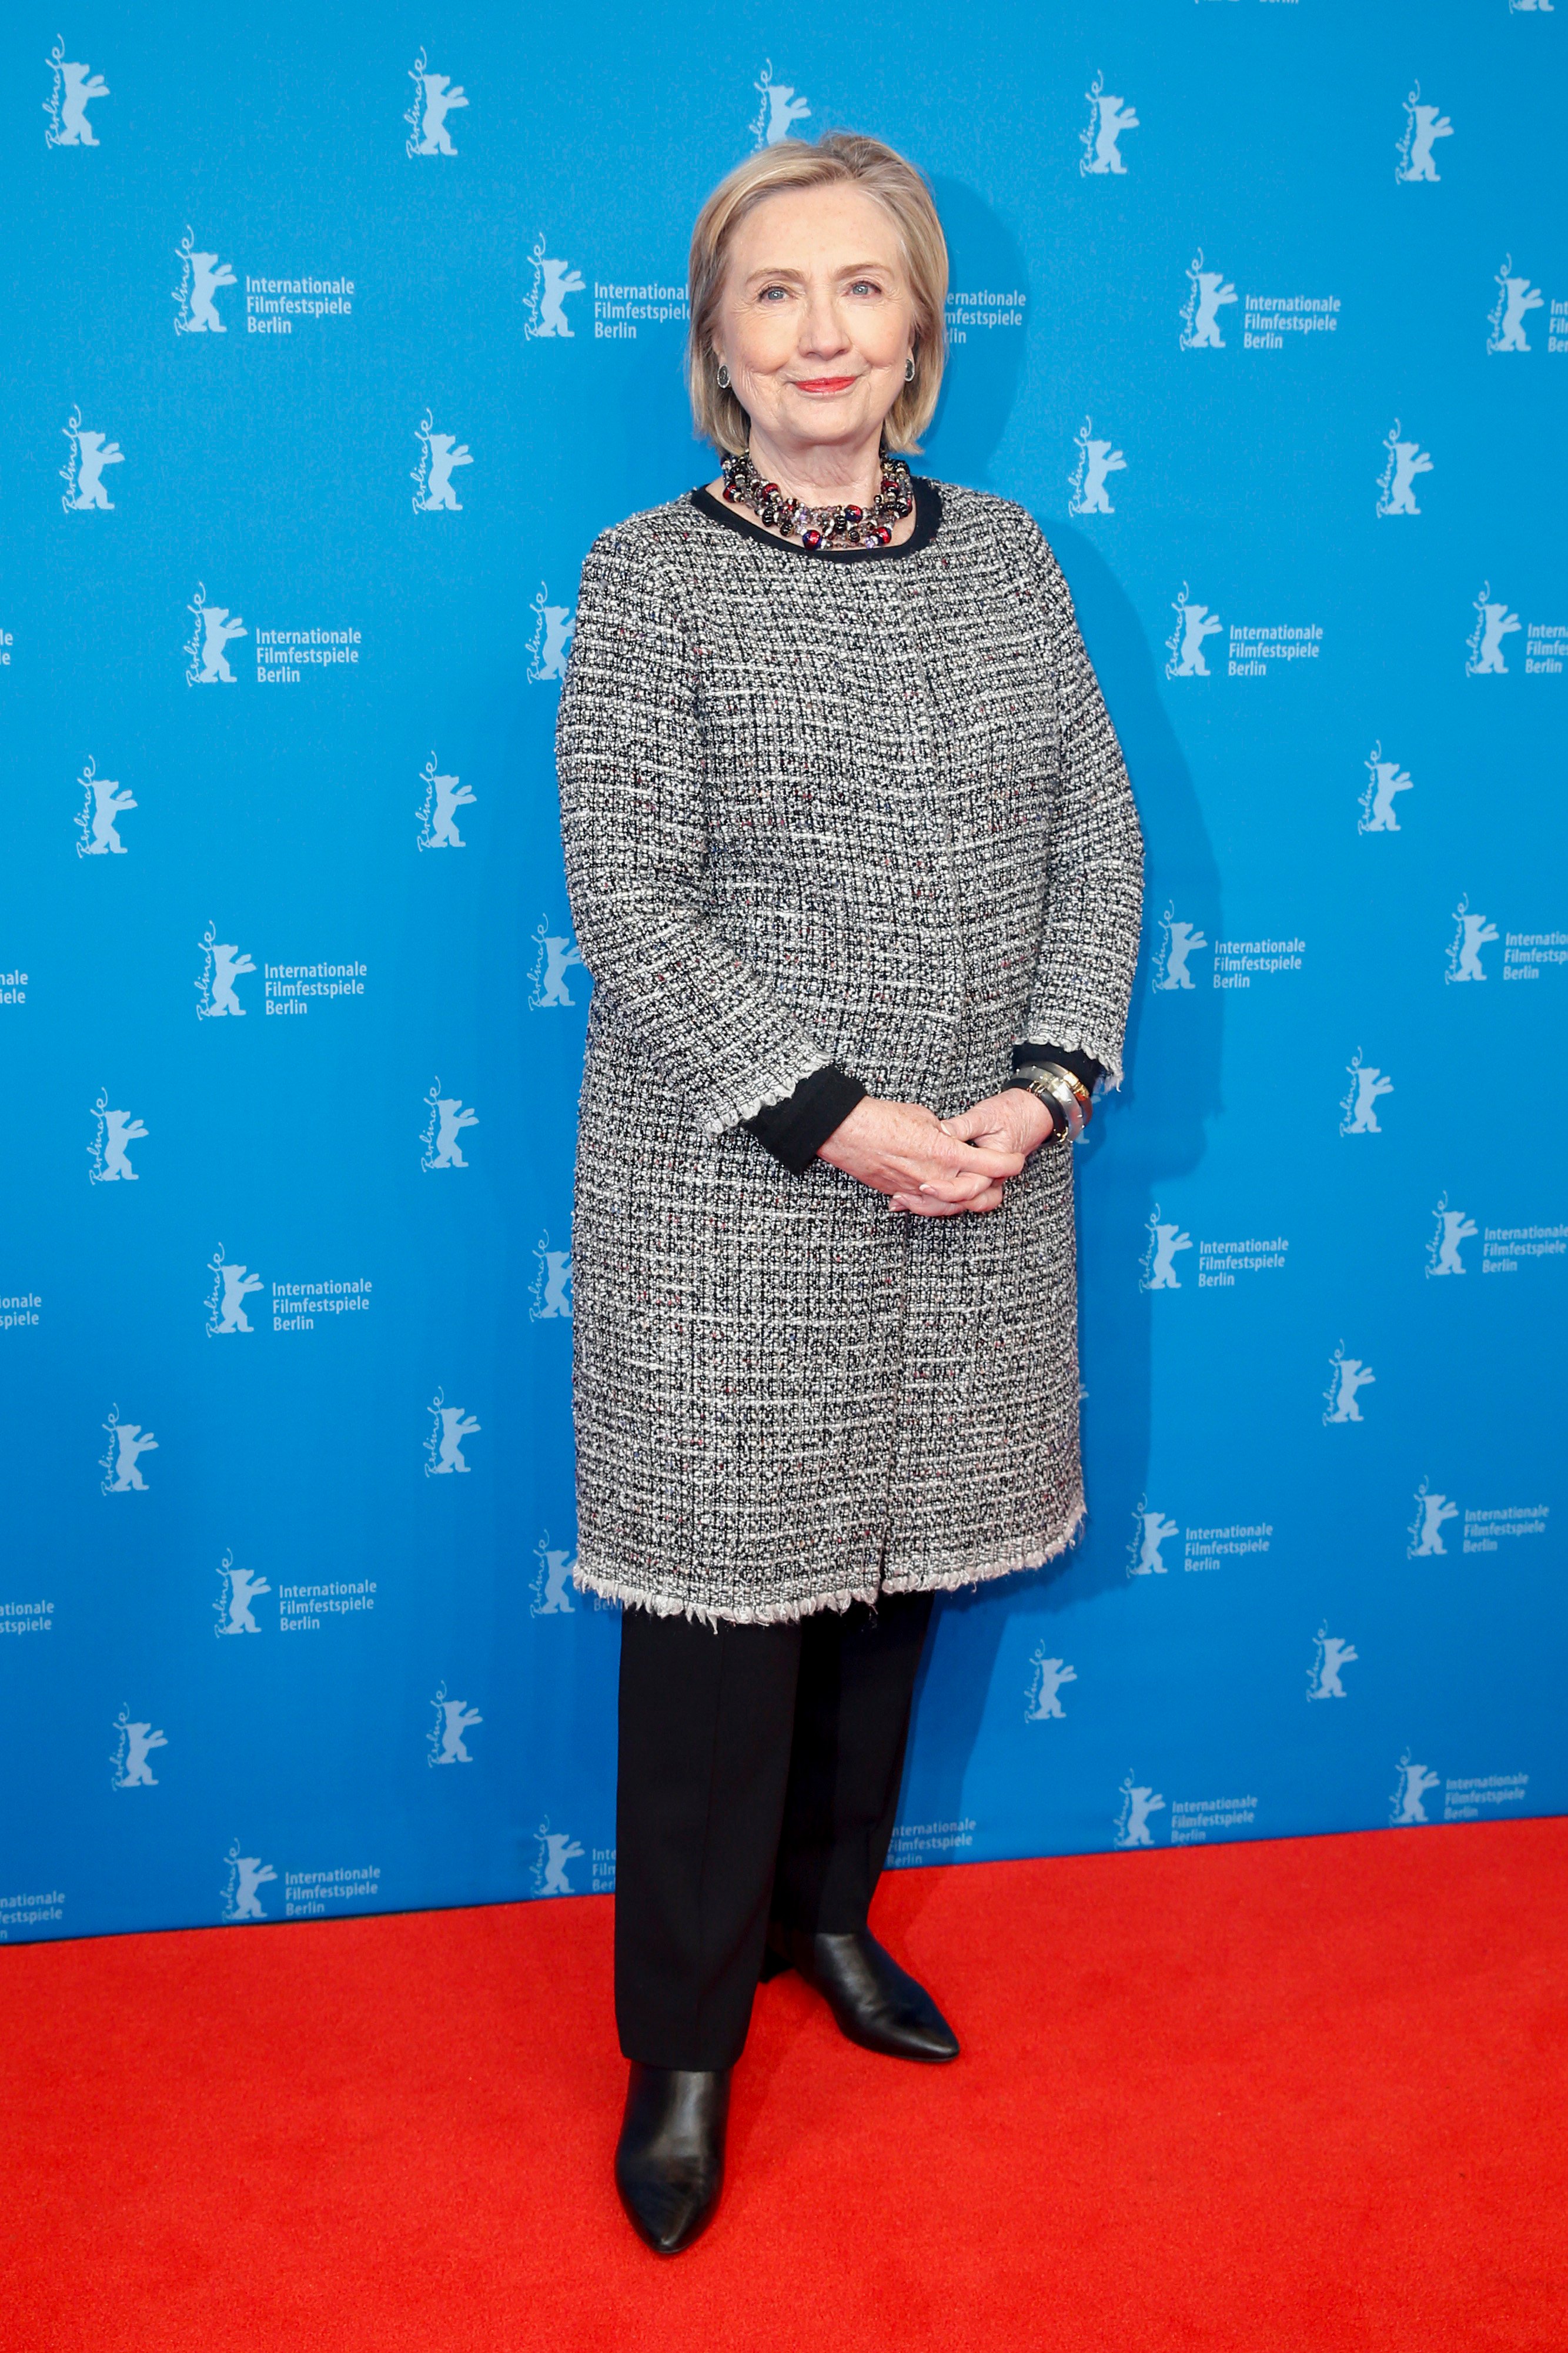 How to recreate the look of former US first lady Hillary Clinton, seen here at the premiere of the documentary film Hillary at the Berlin International Film Festival in 2020. Photo: WireImage